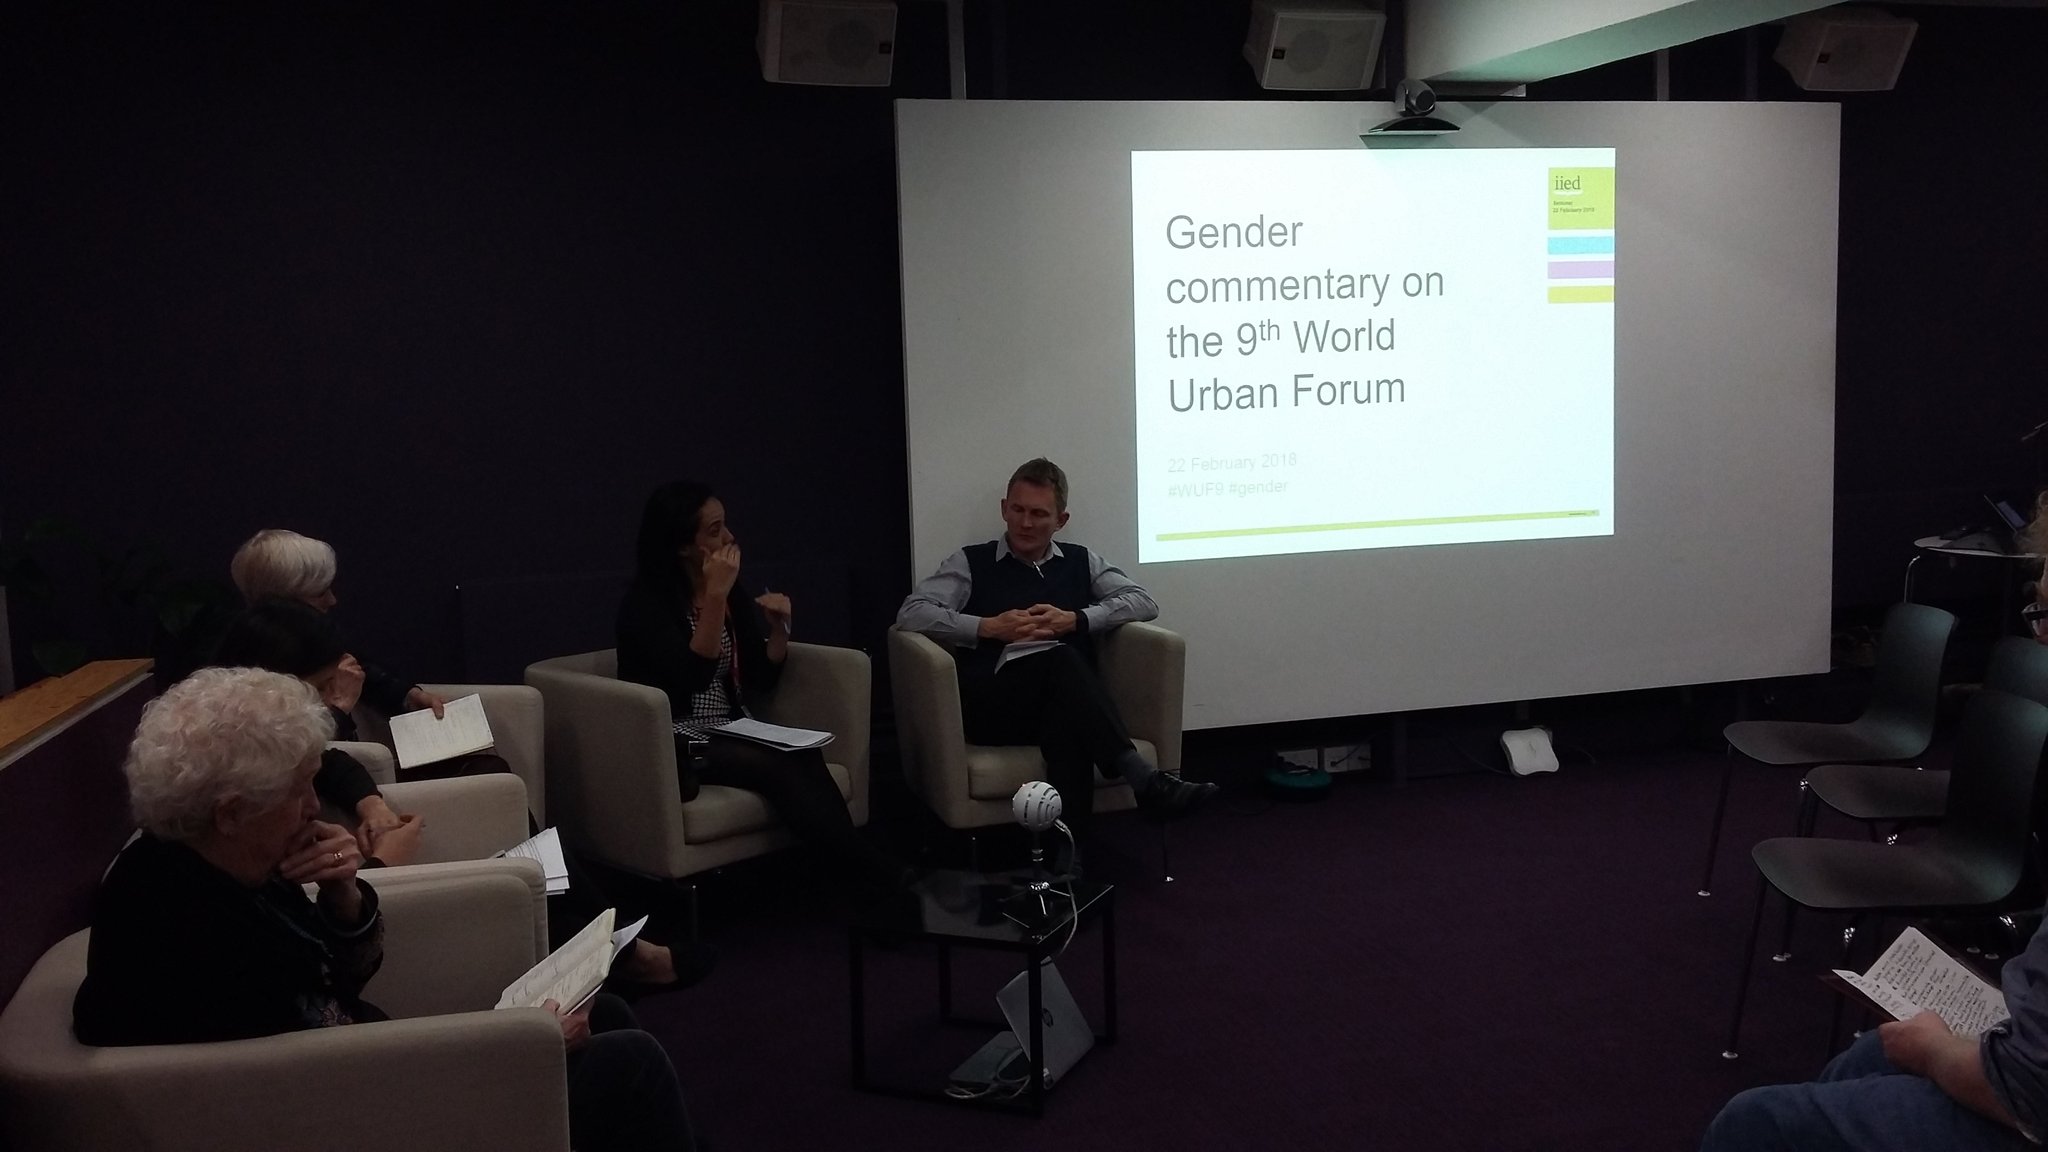 Rich discussion at @iied on gender at #WUF9. One big gap Caroline Moser suggests is being able to translate results of gender analysis into practice. Lots of capability on theory but less on operations. https://t.co/ZvdPUuFynx